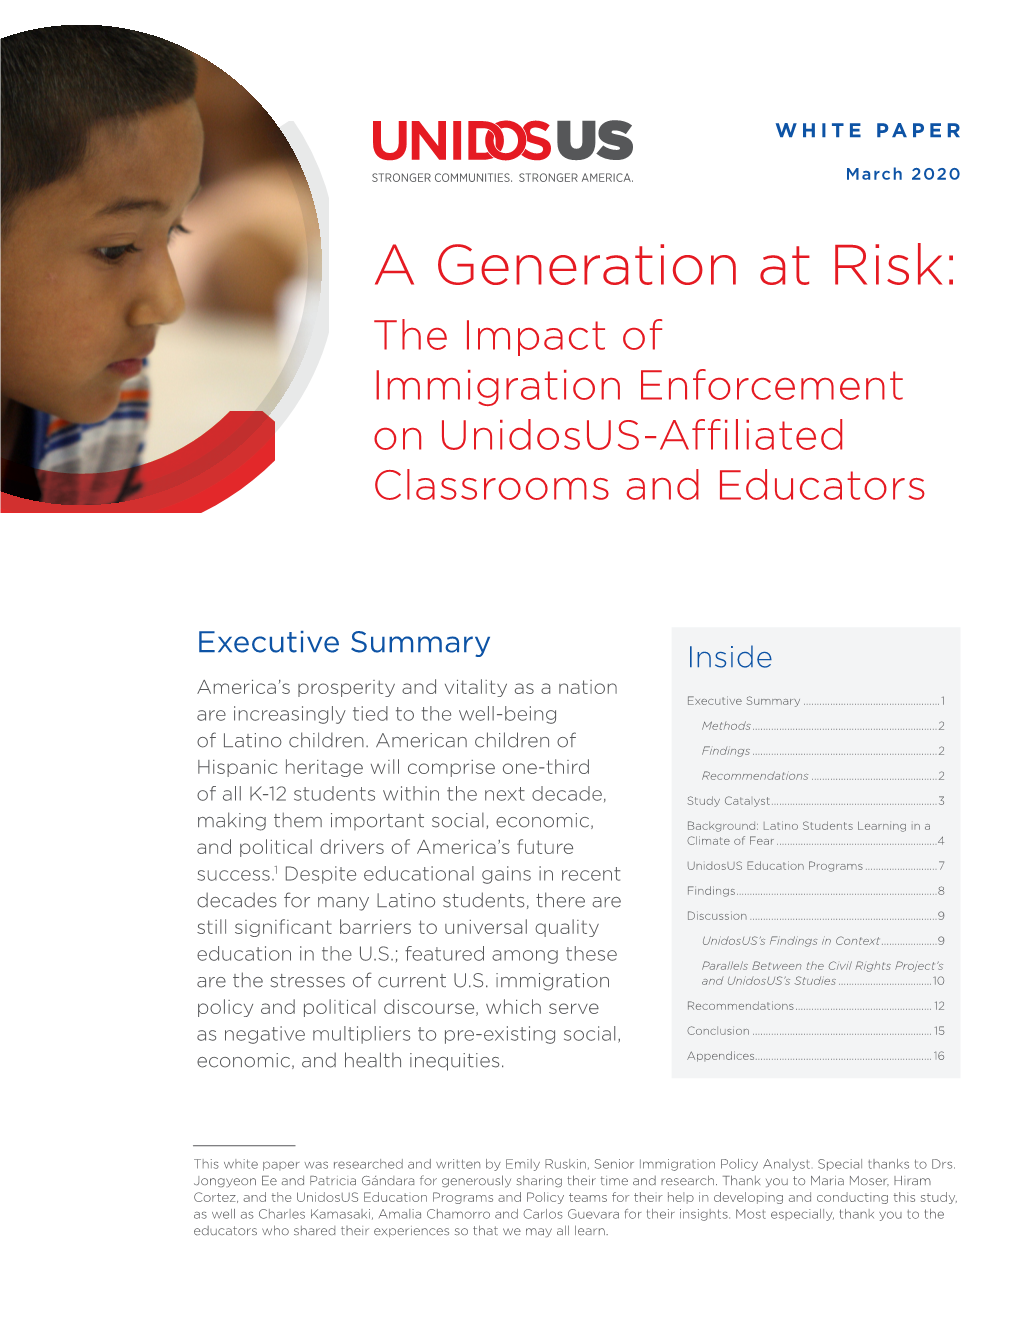 A Generation at Risk: the Impact of Immigration Enforcement on Unidosus-Affiliated Classrooms and Educators